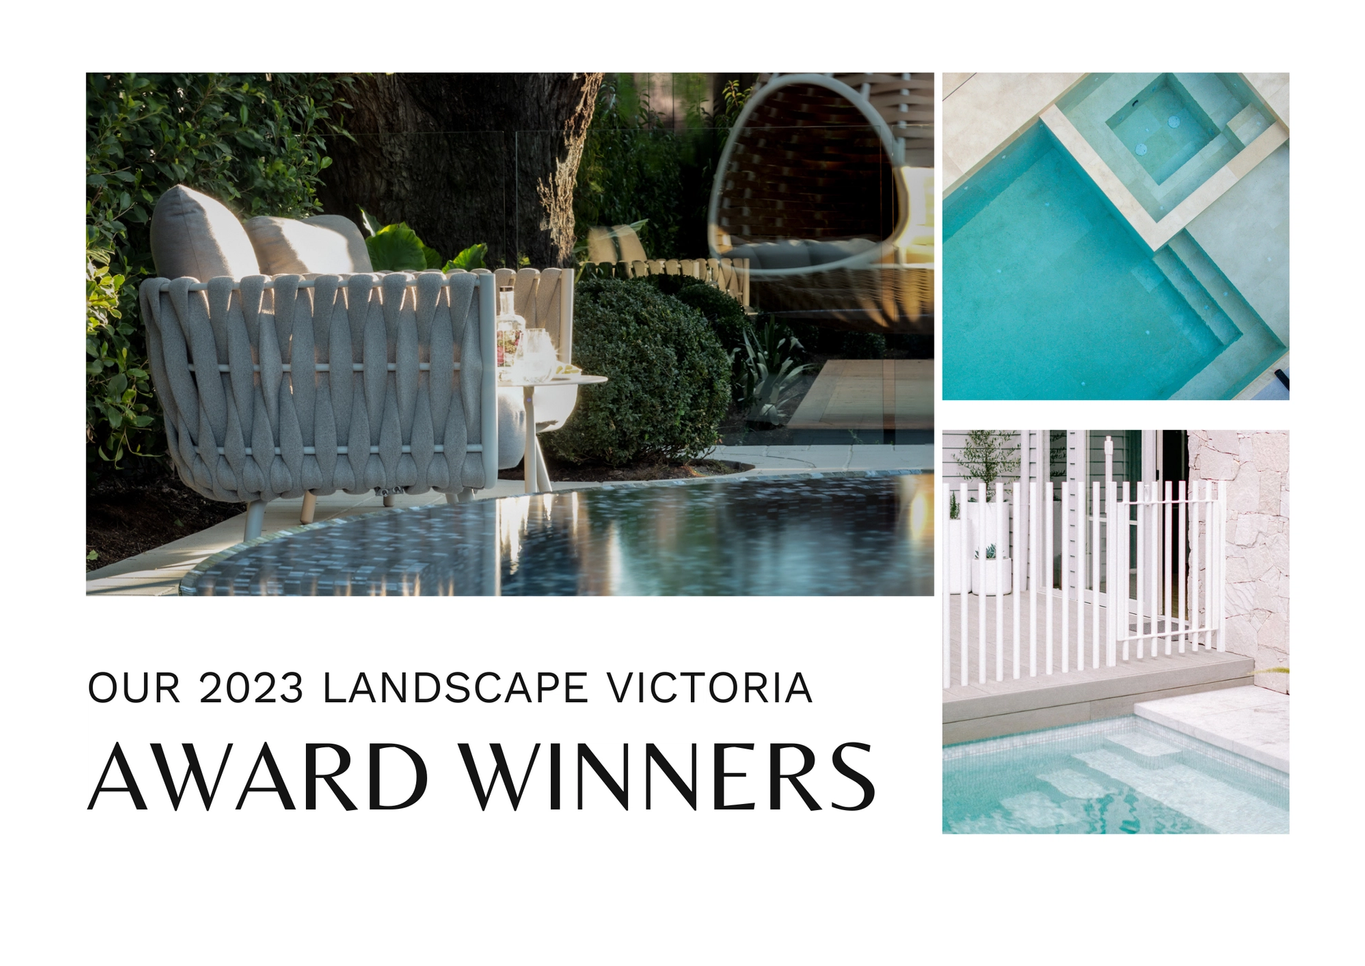 Summary of our 2023 Landscape Victoria award winning projects